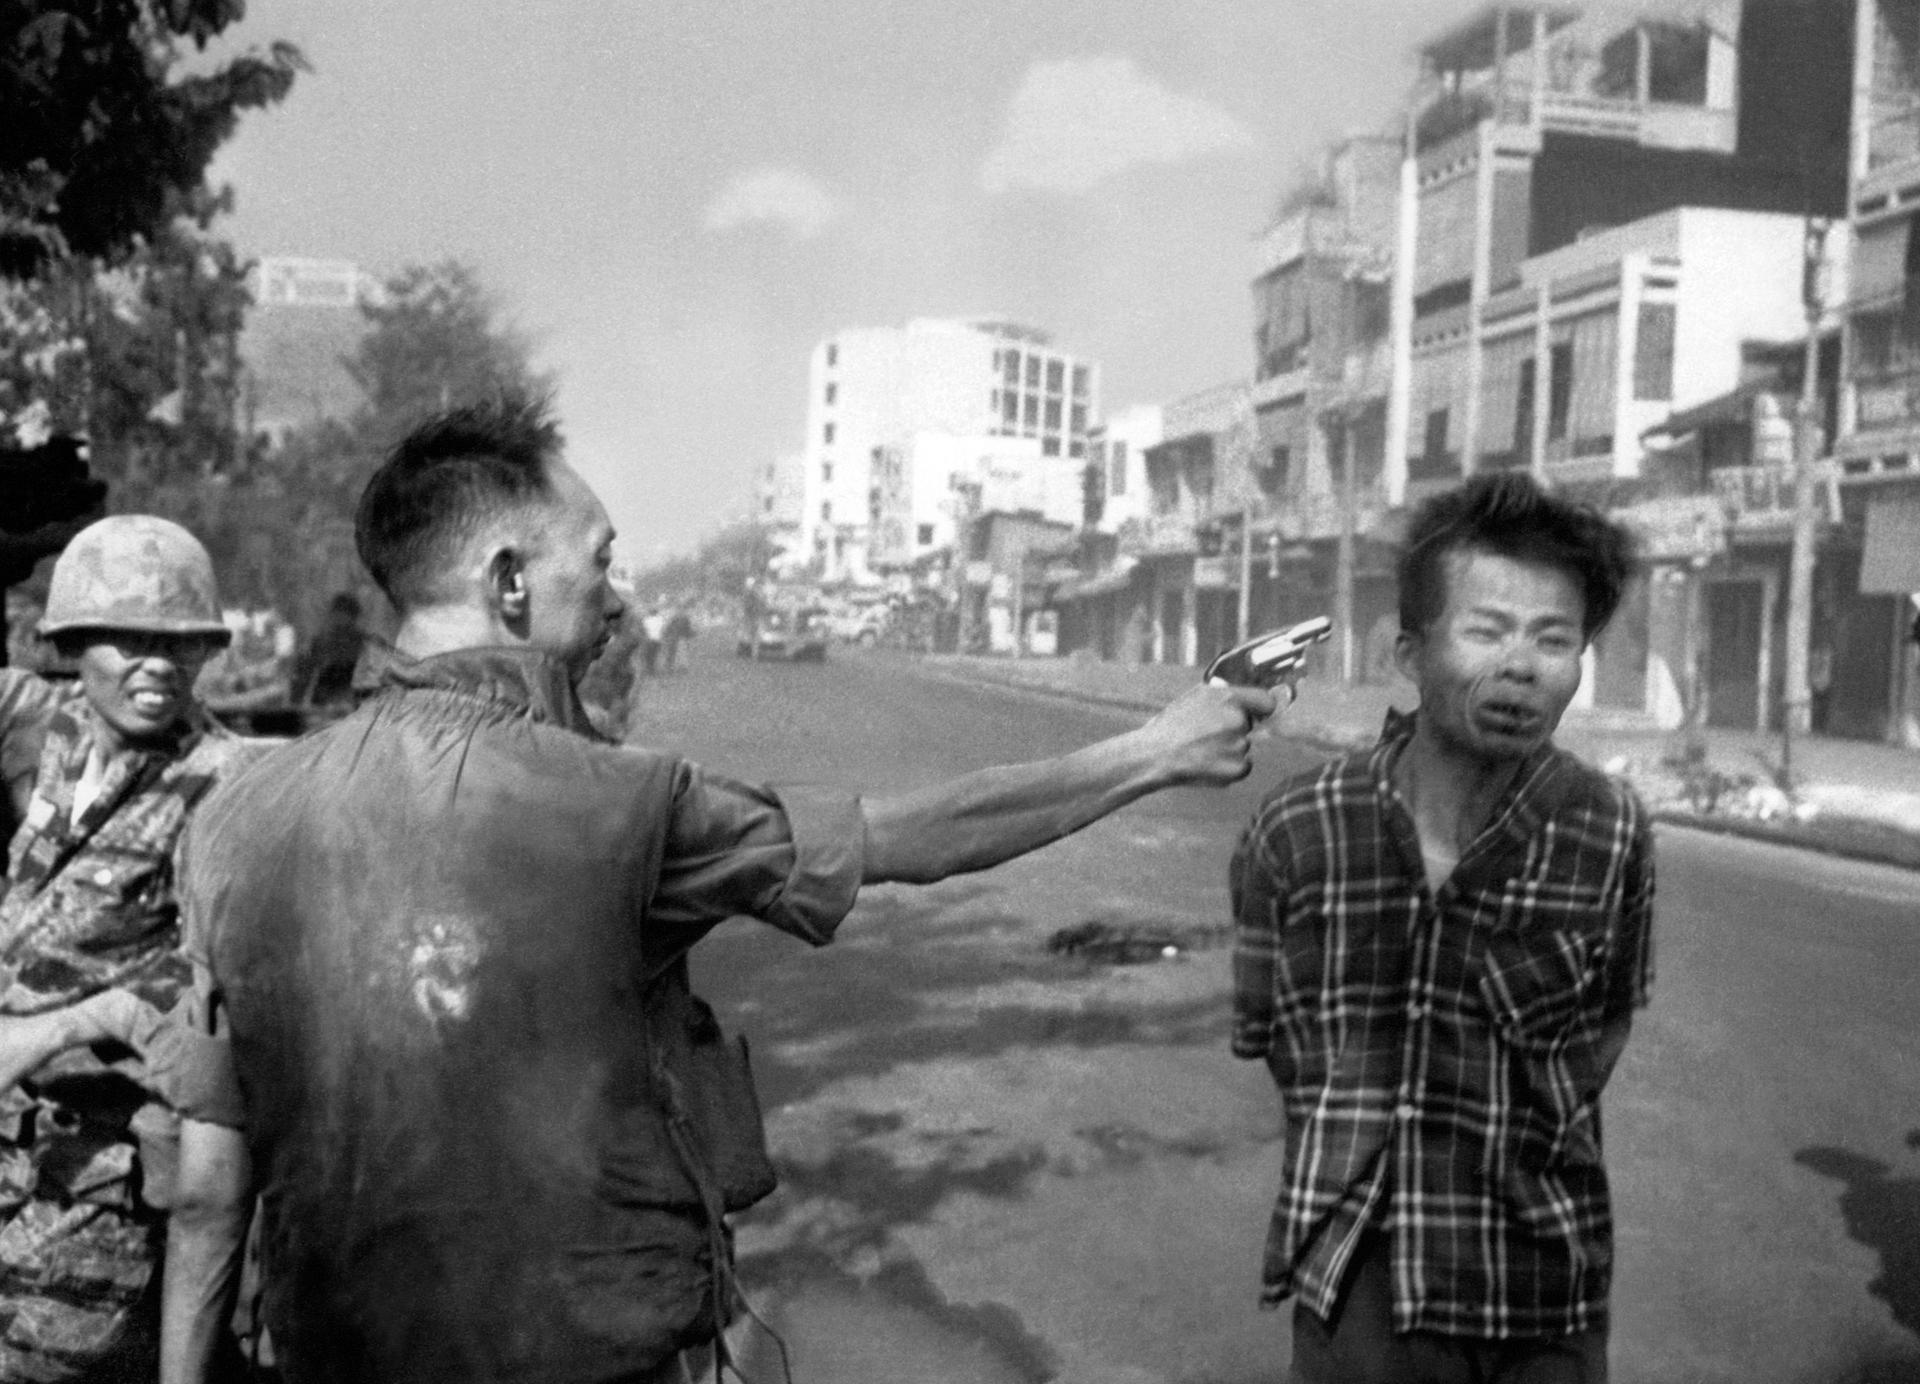 General Nguyen shooting a Vietcong prisoner- The prisoner was caught cutting the throats of a South Vietnamese officer and his family, who were close friends of General Nguyen, and the general shot him in vengeance.